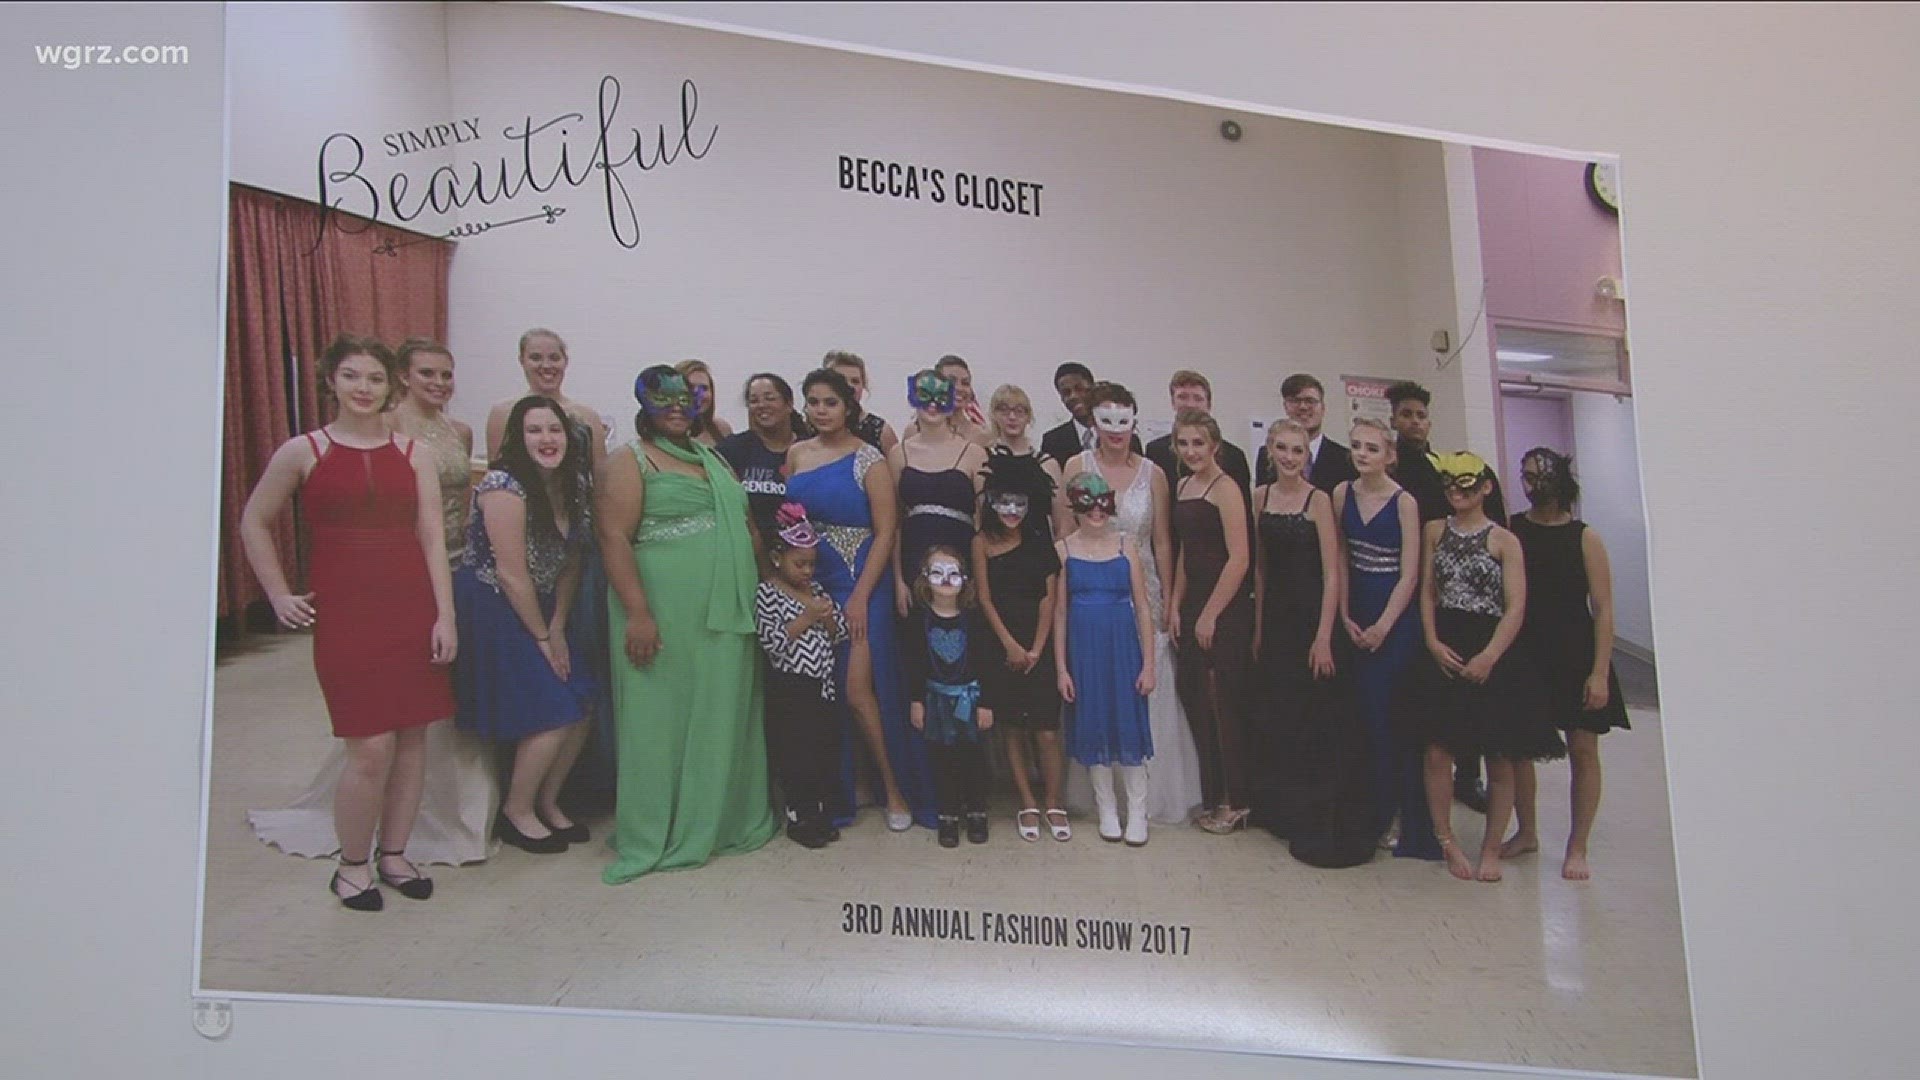 An organization called WHO is helping young women one dress at a time.